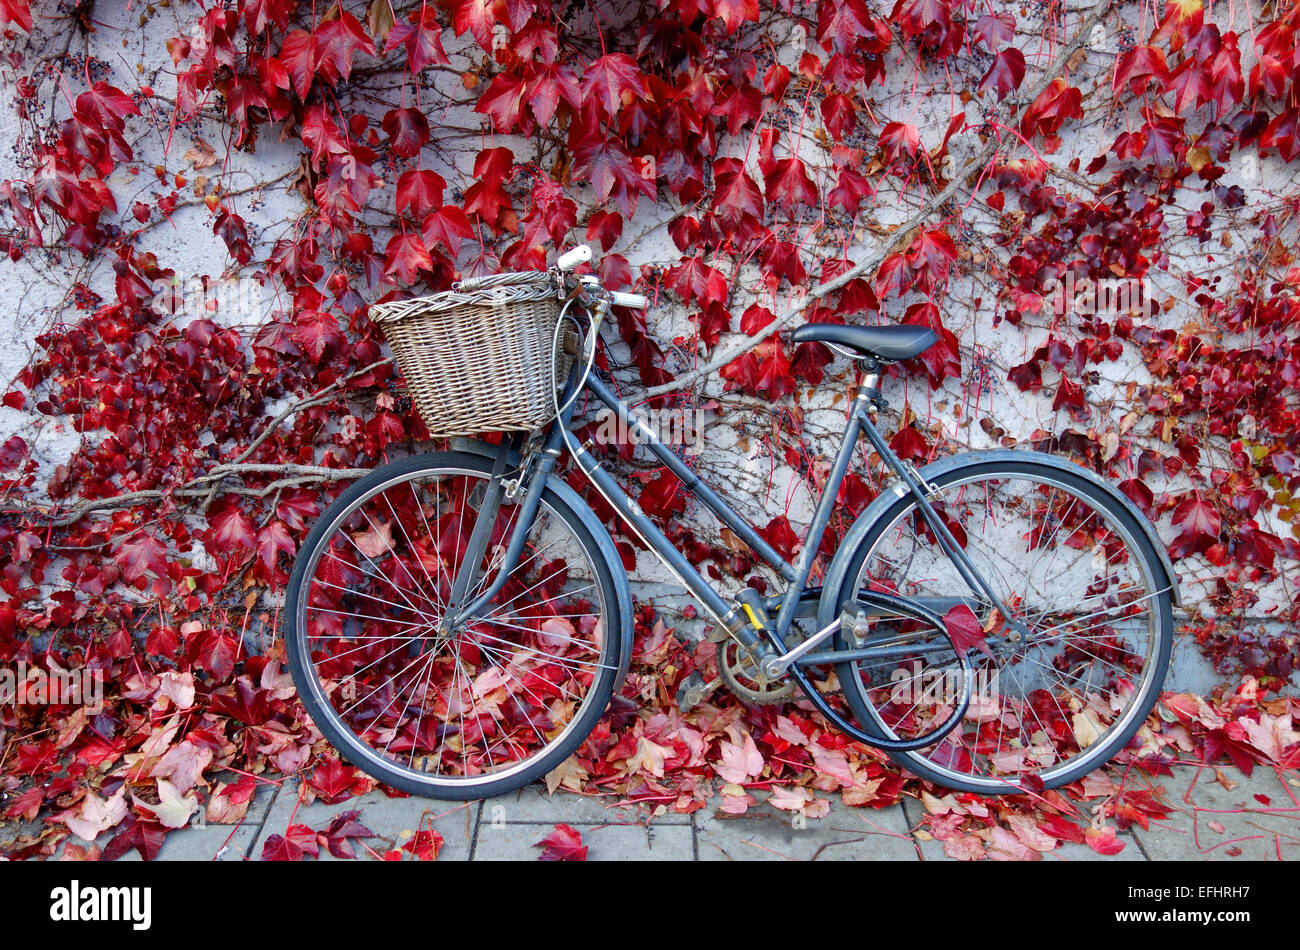 Bicycle leaning against red autumnal leaves, Oxford, Angleterre, Royaume-Uni Banque D'Images